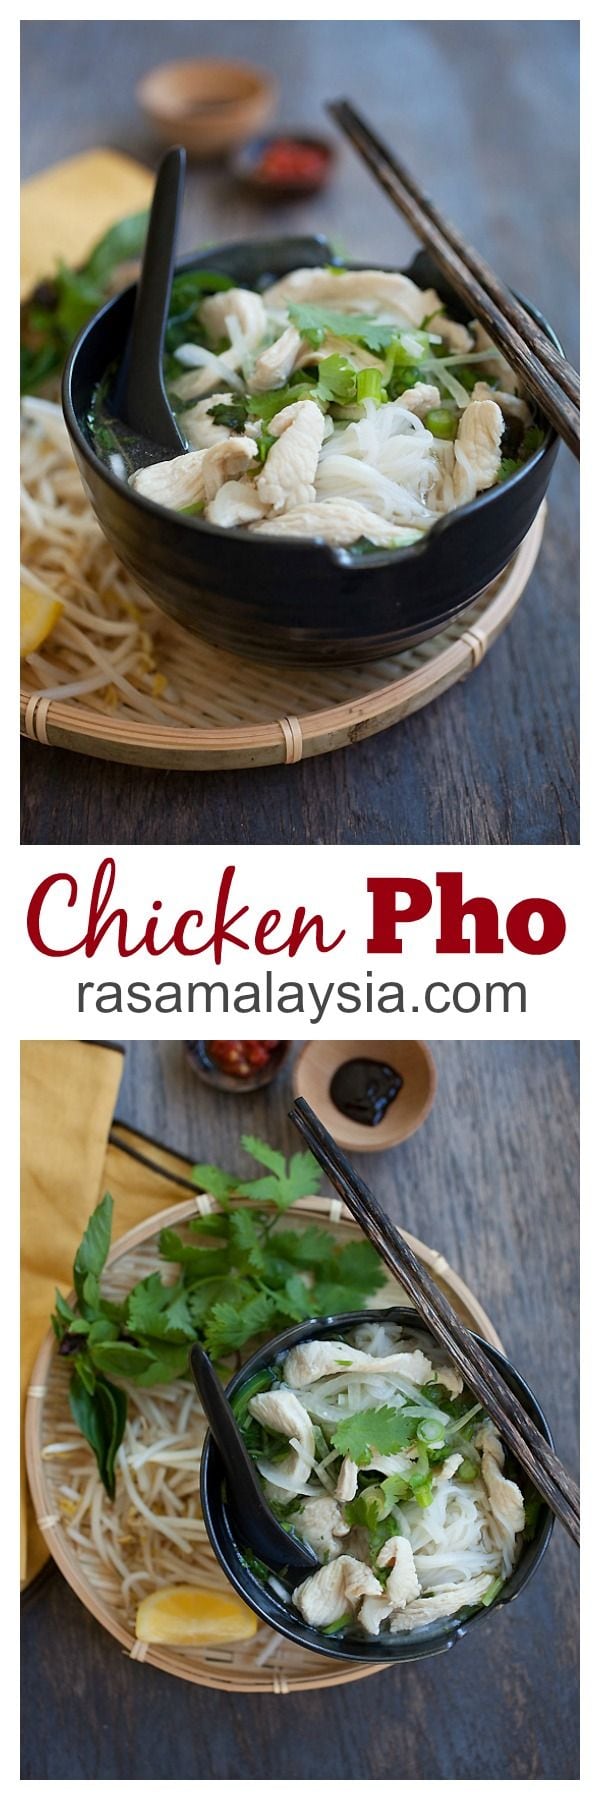 Chicken Pho - hearty Vietnamese chicken noodles soup, hearty and super delicious. Get the easy recipe | rasamalaysia.com